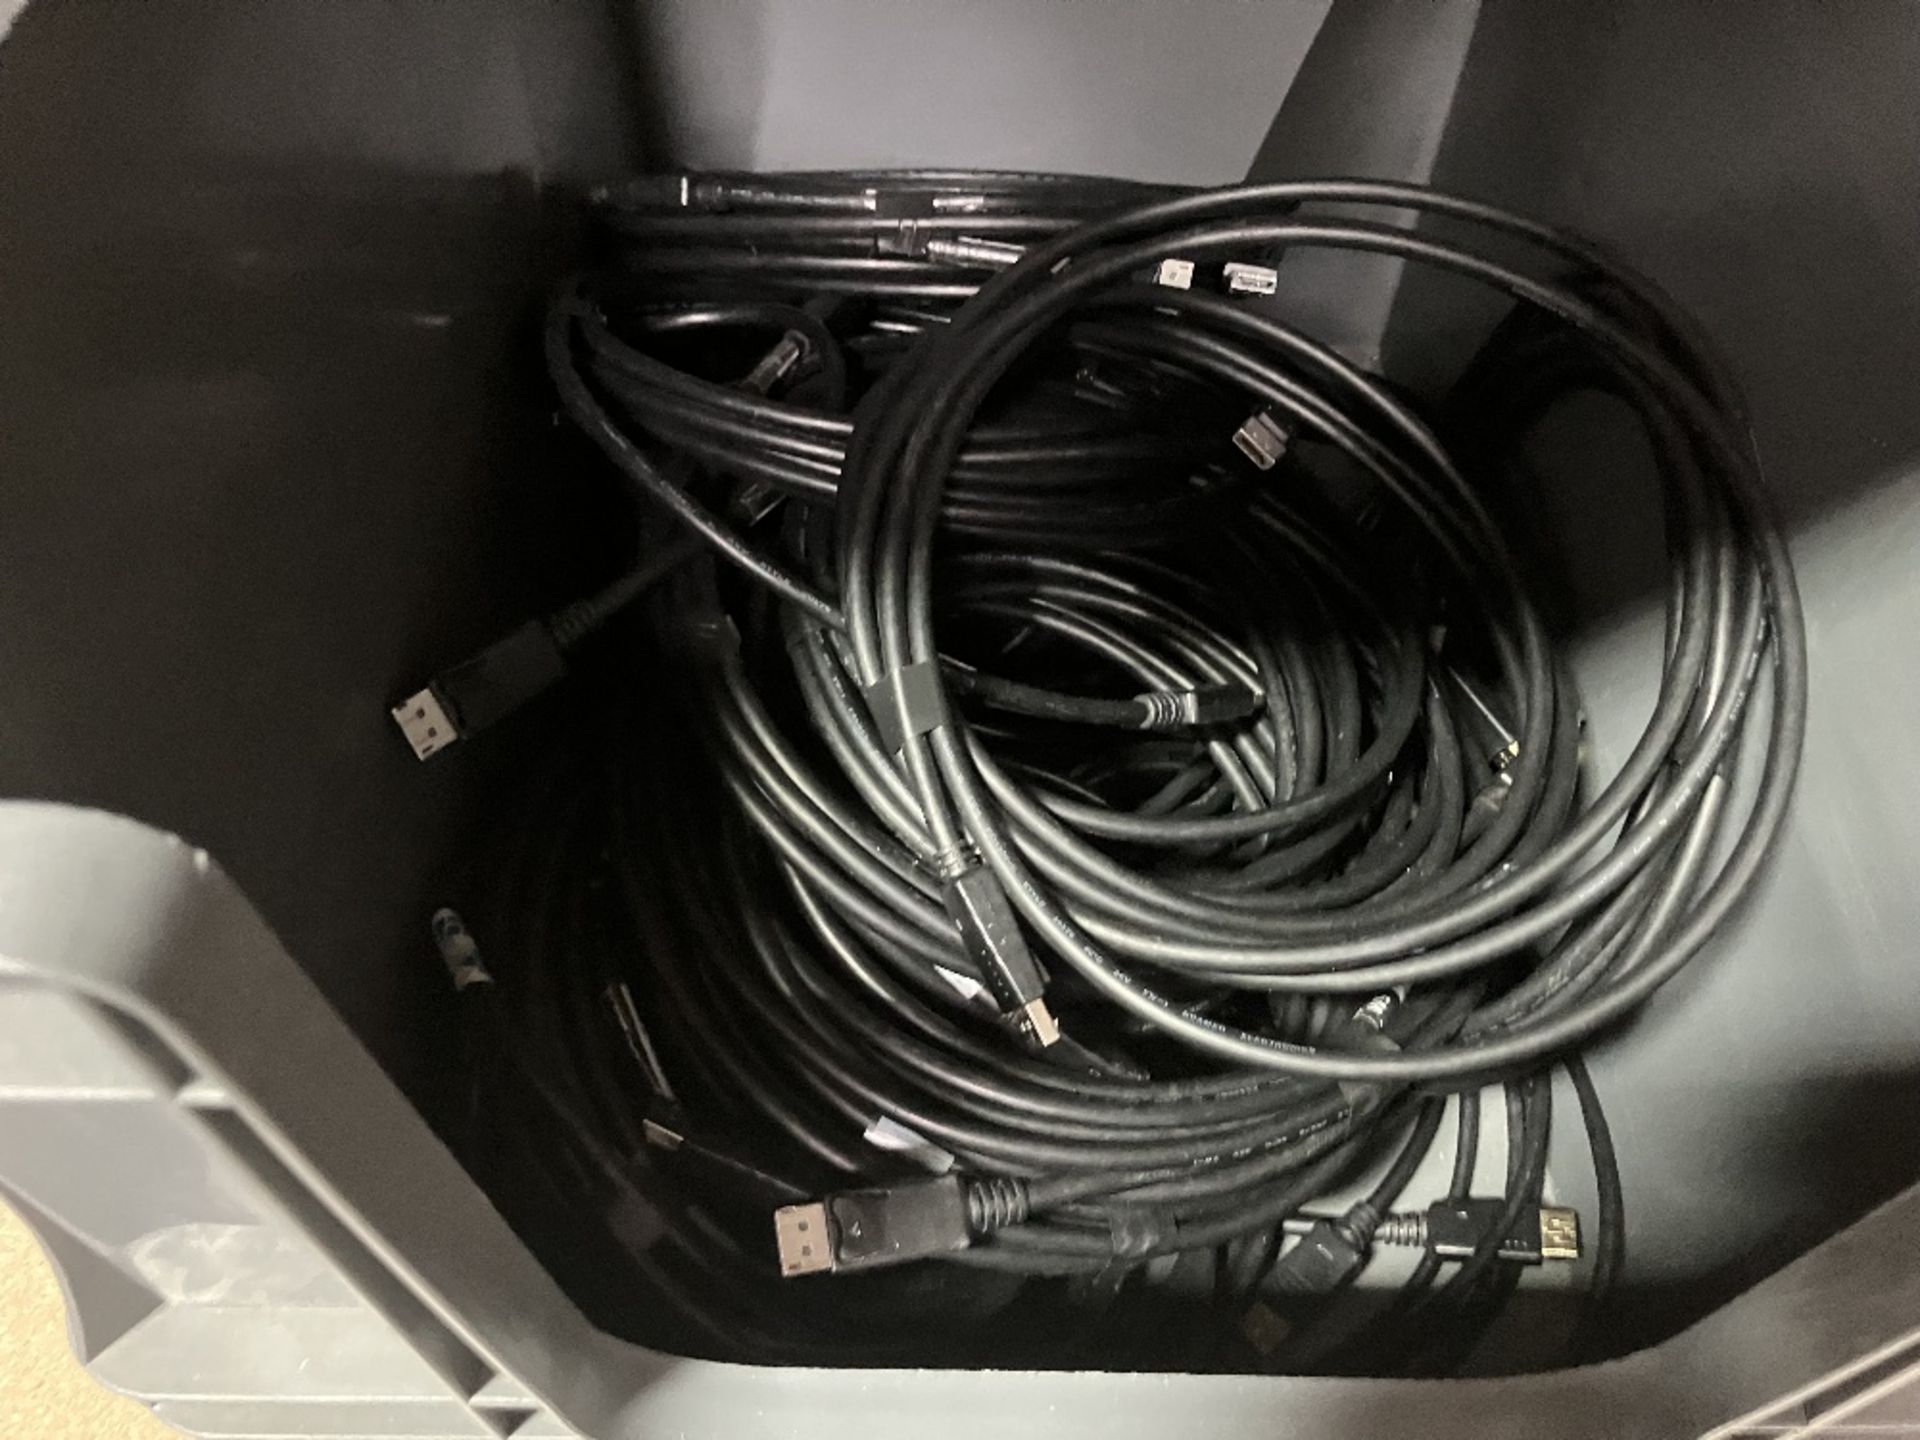 Large Quantity of 5m DisplayPort M-M Cables With Plastic Lin Bins - Image 2 of 5